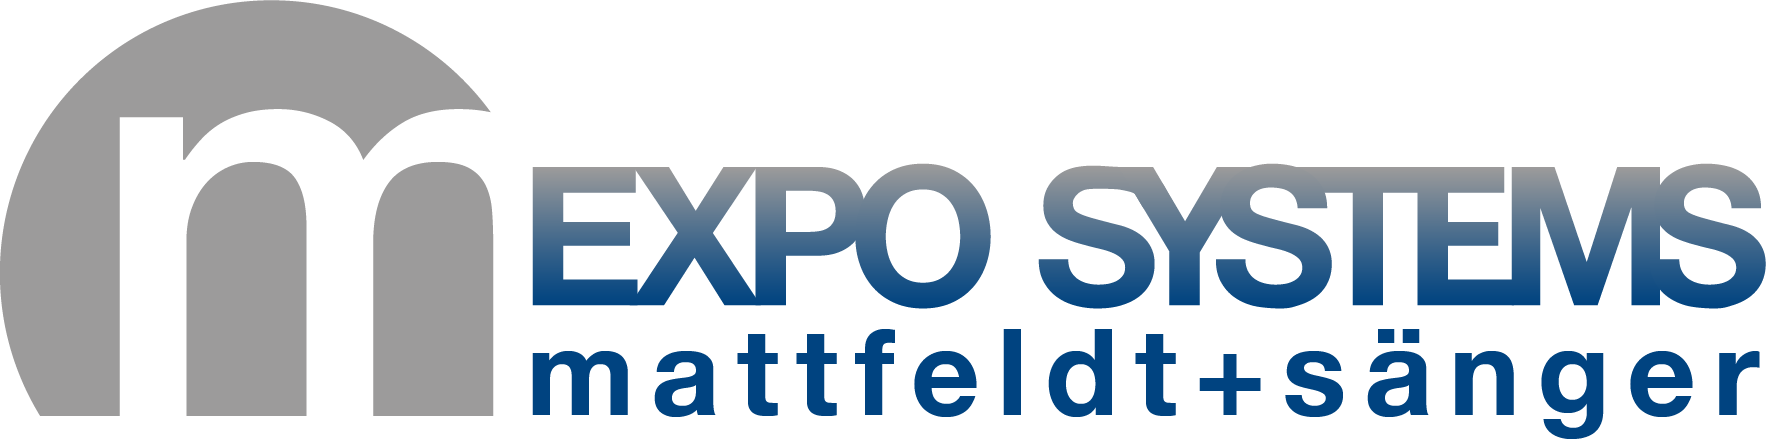 EXPO SYSTEMS - Messestandsysteme